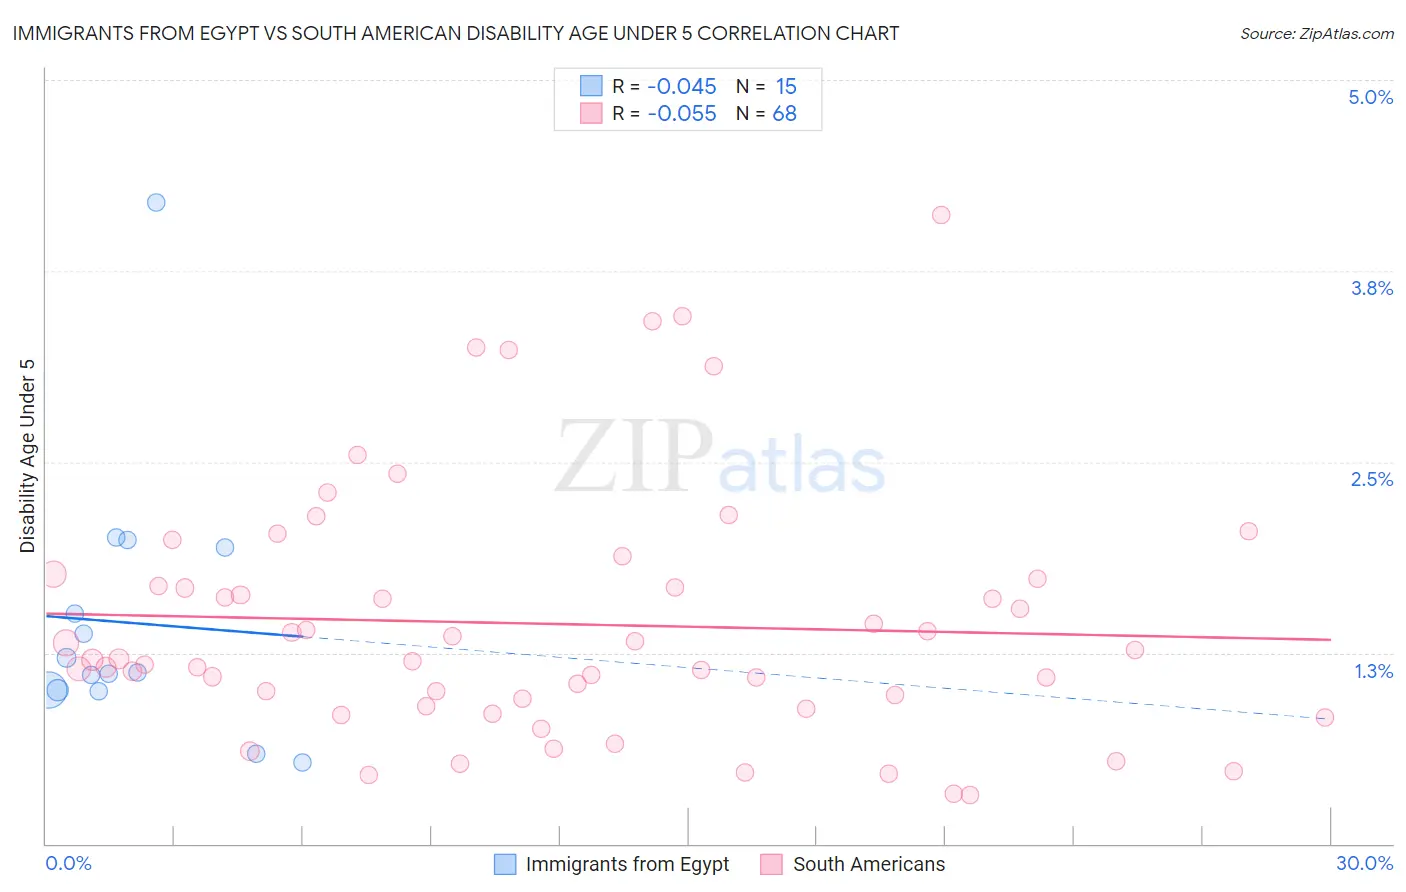 Immigrants from Egypt vs South American Disability Age Under 5